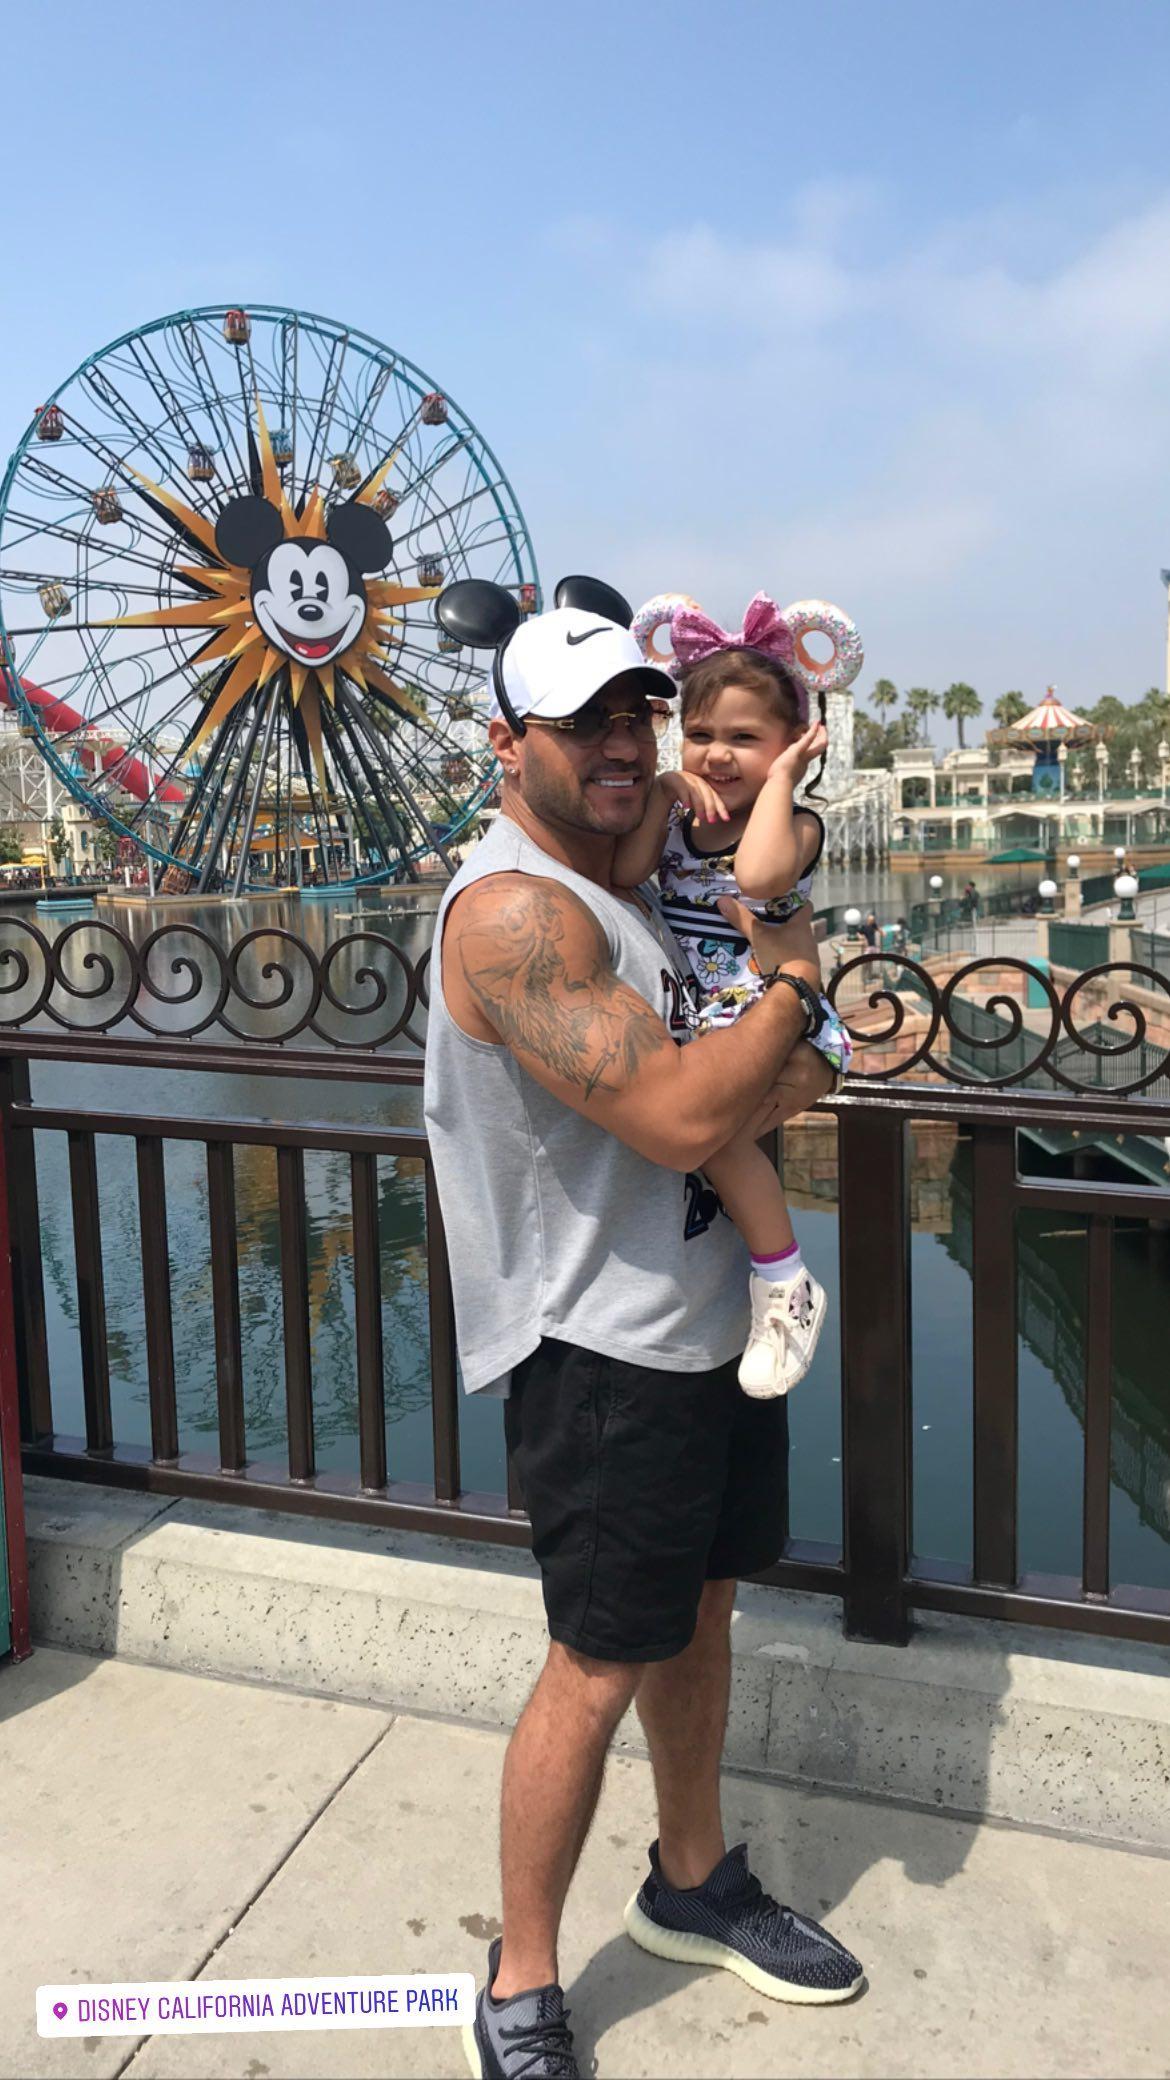 Ronnie and daughter at Disneyland